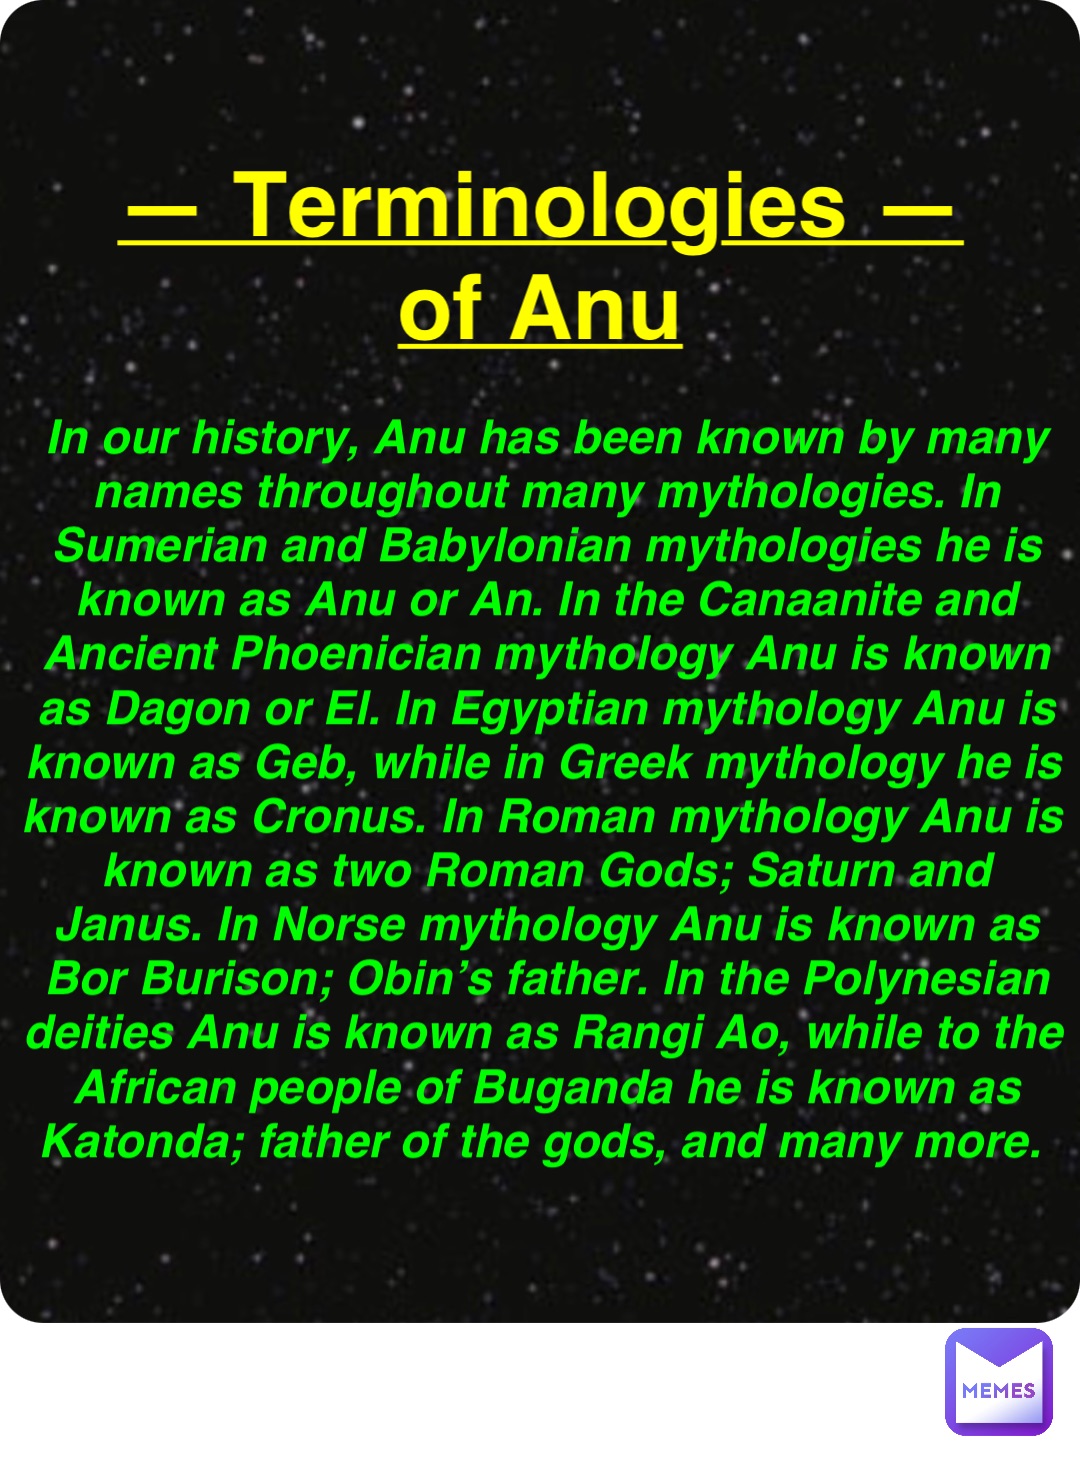 Double tap to edit — Terminologies —
of Anu In our history, Anu has been known by many names throughout many mythologies. In Sumerian and Babylonian mythologies he is known as Anu or An. In the Canaanite and Ancient Phoenician mythology Anu is known as Dagon or El. In Egyptian mythology Anu is known as Geb, while in Greek mythology he is known as Cronus. In Roman mythology Anu is known as two Roman Gods; Saturn and Janus. In Norse mythology Anu is known as Bor Burison; Obin’s father. In the Polynesian deities Anu is known as Rangi Ao, while to the African people of Buganda he is known as Katonda; father of the gods, and many more.